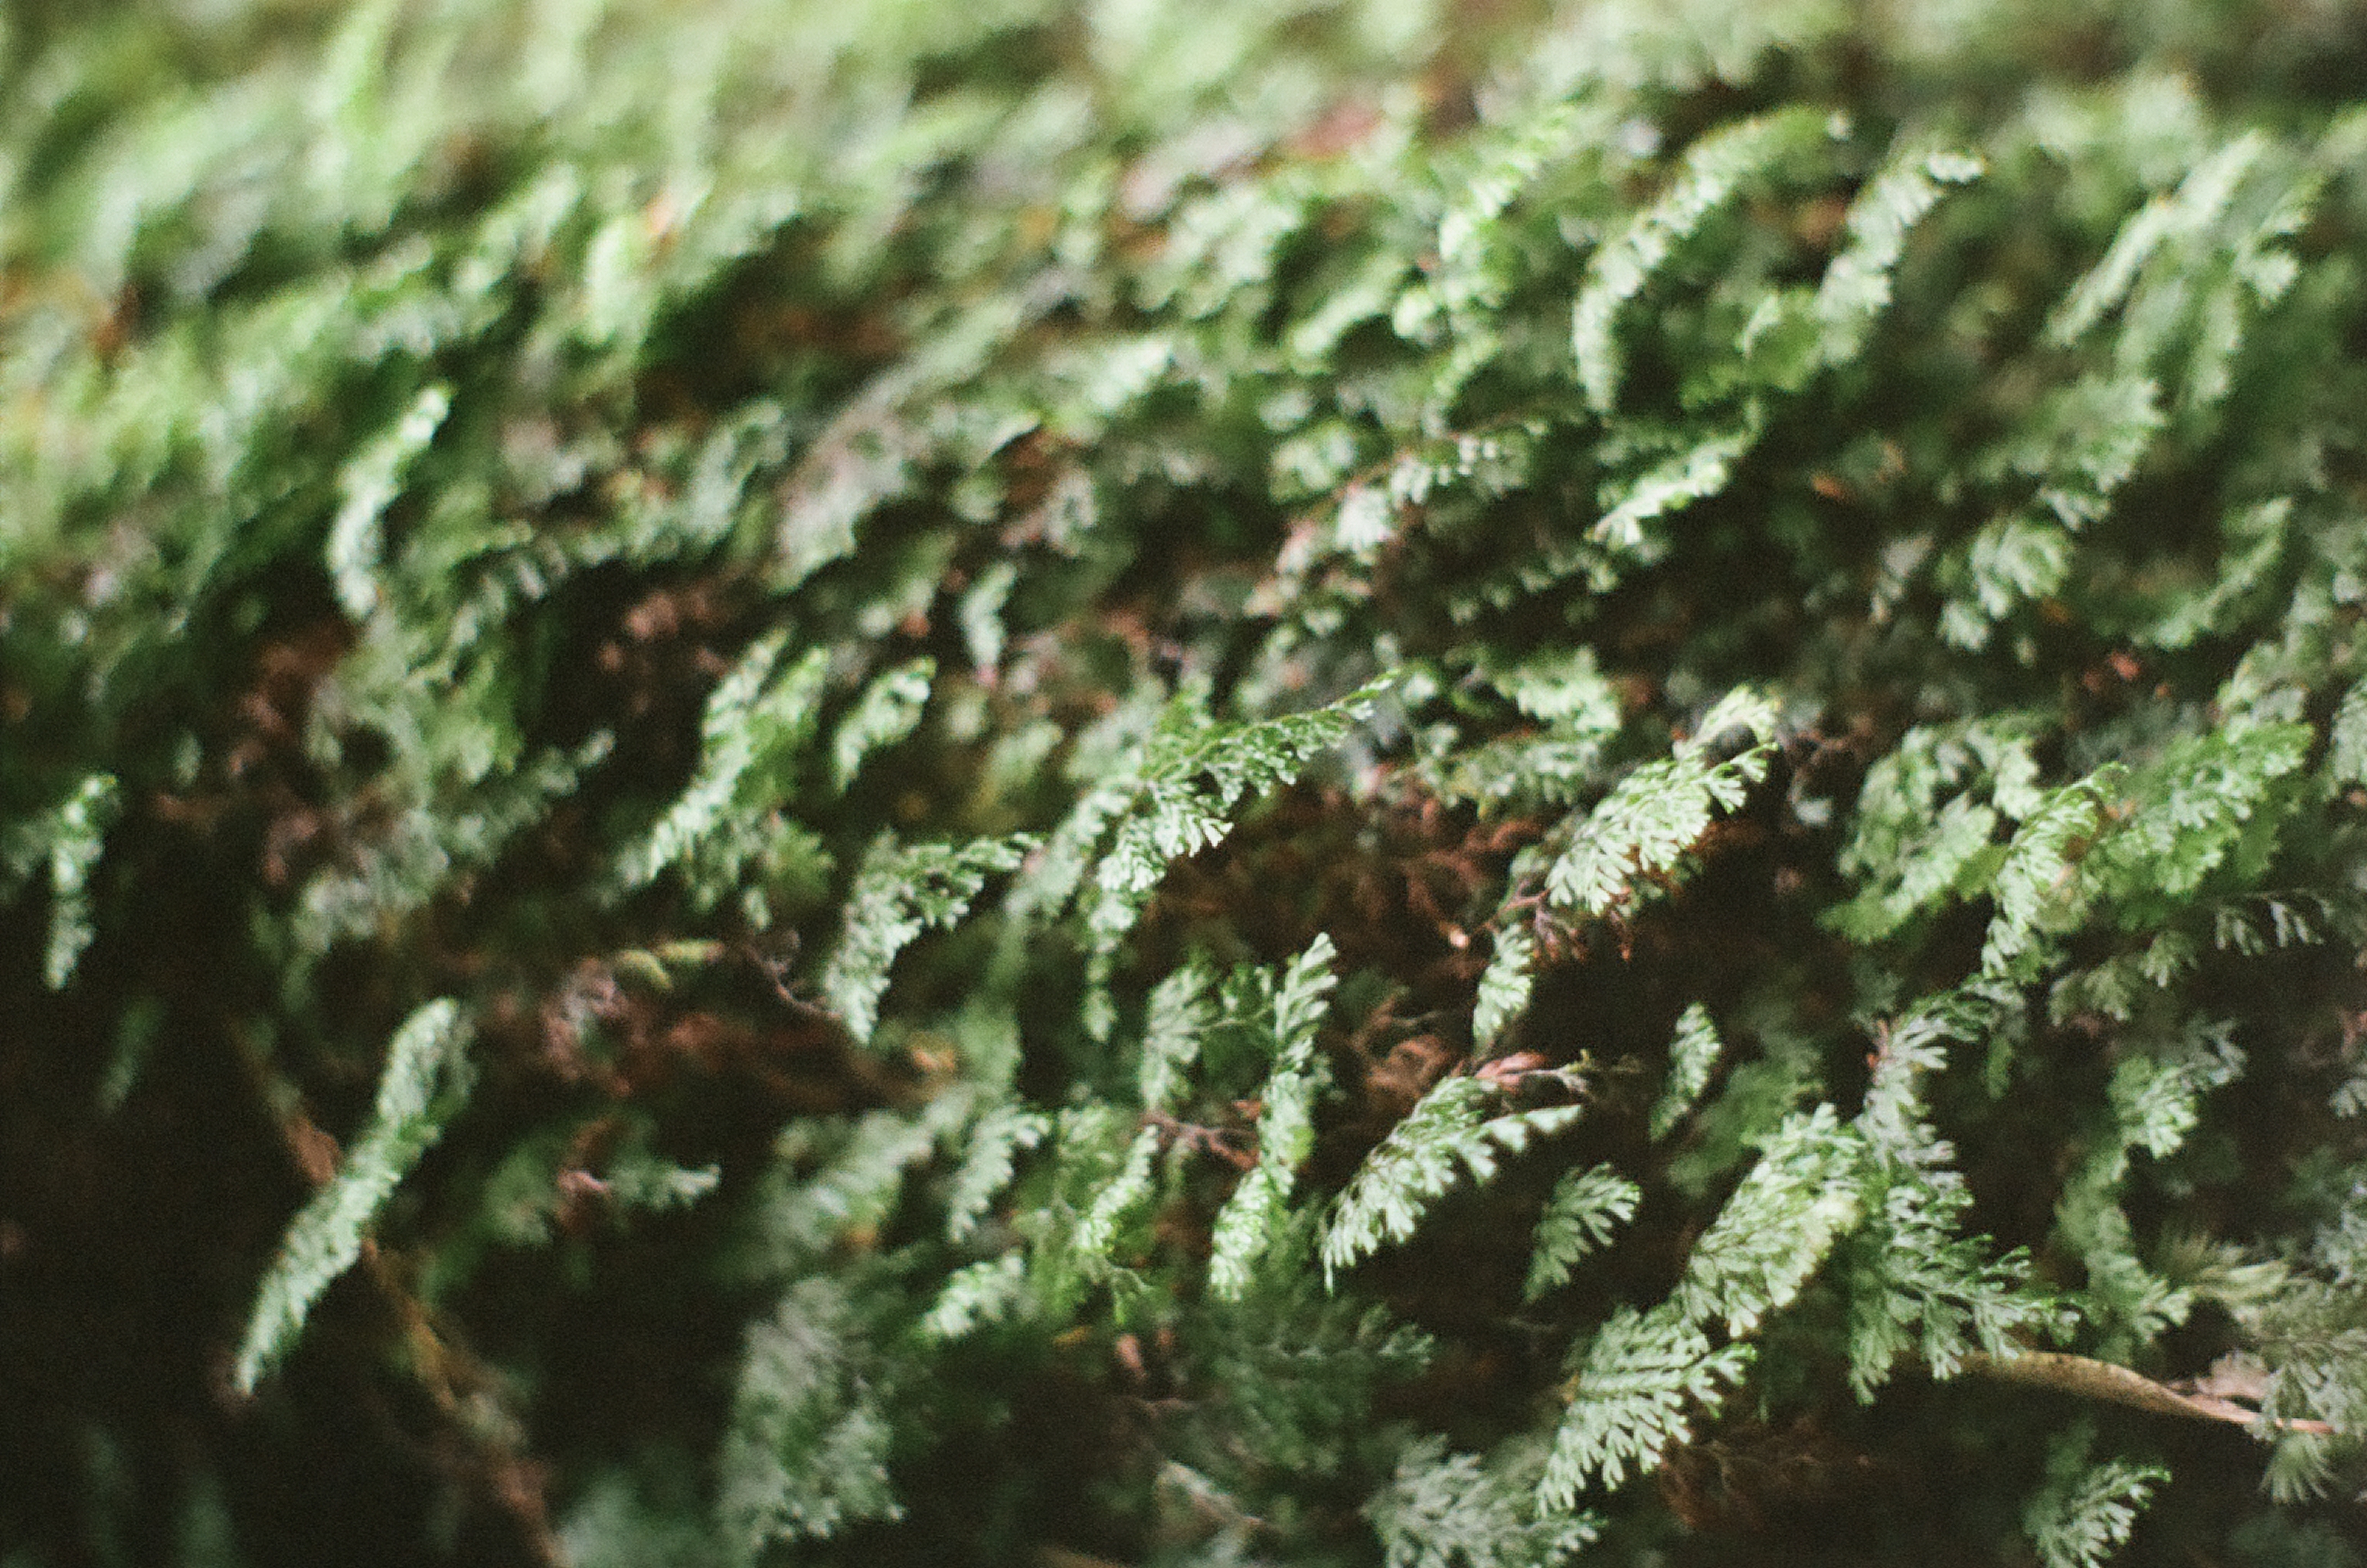 softly focused close-up picture of ferns